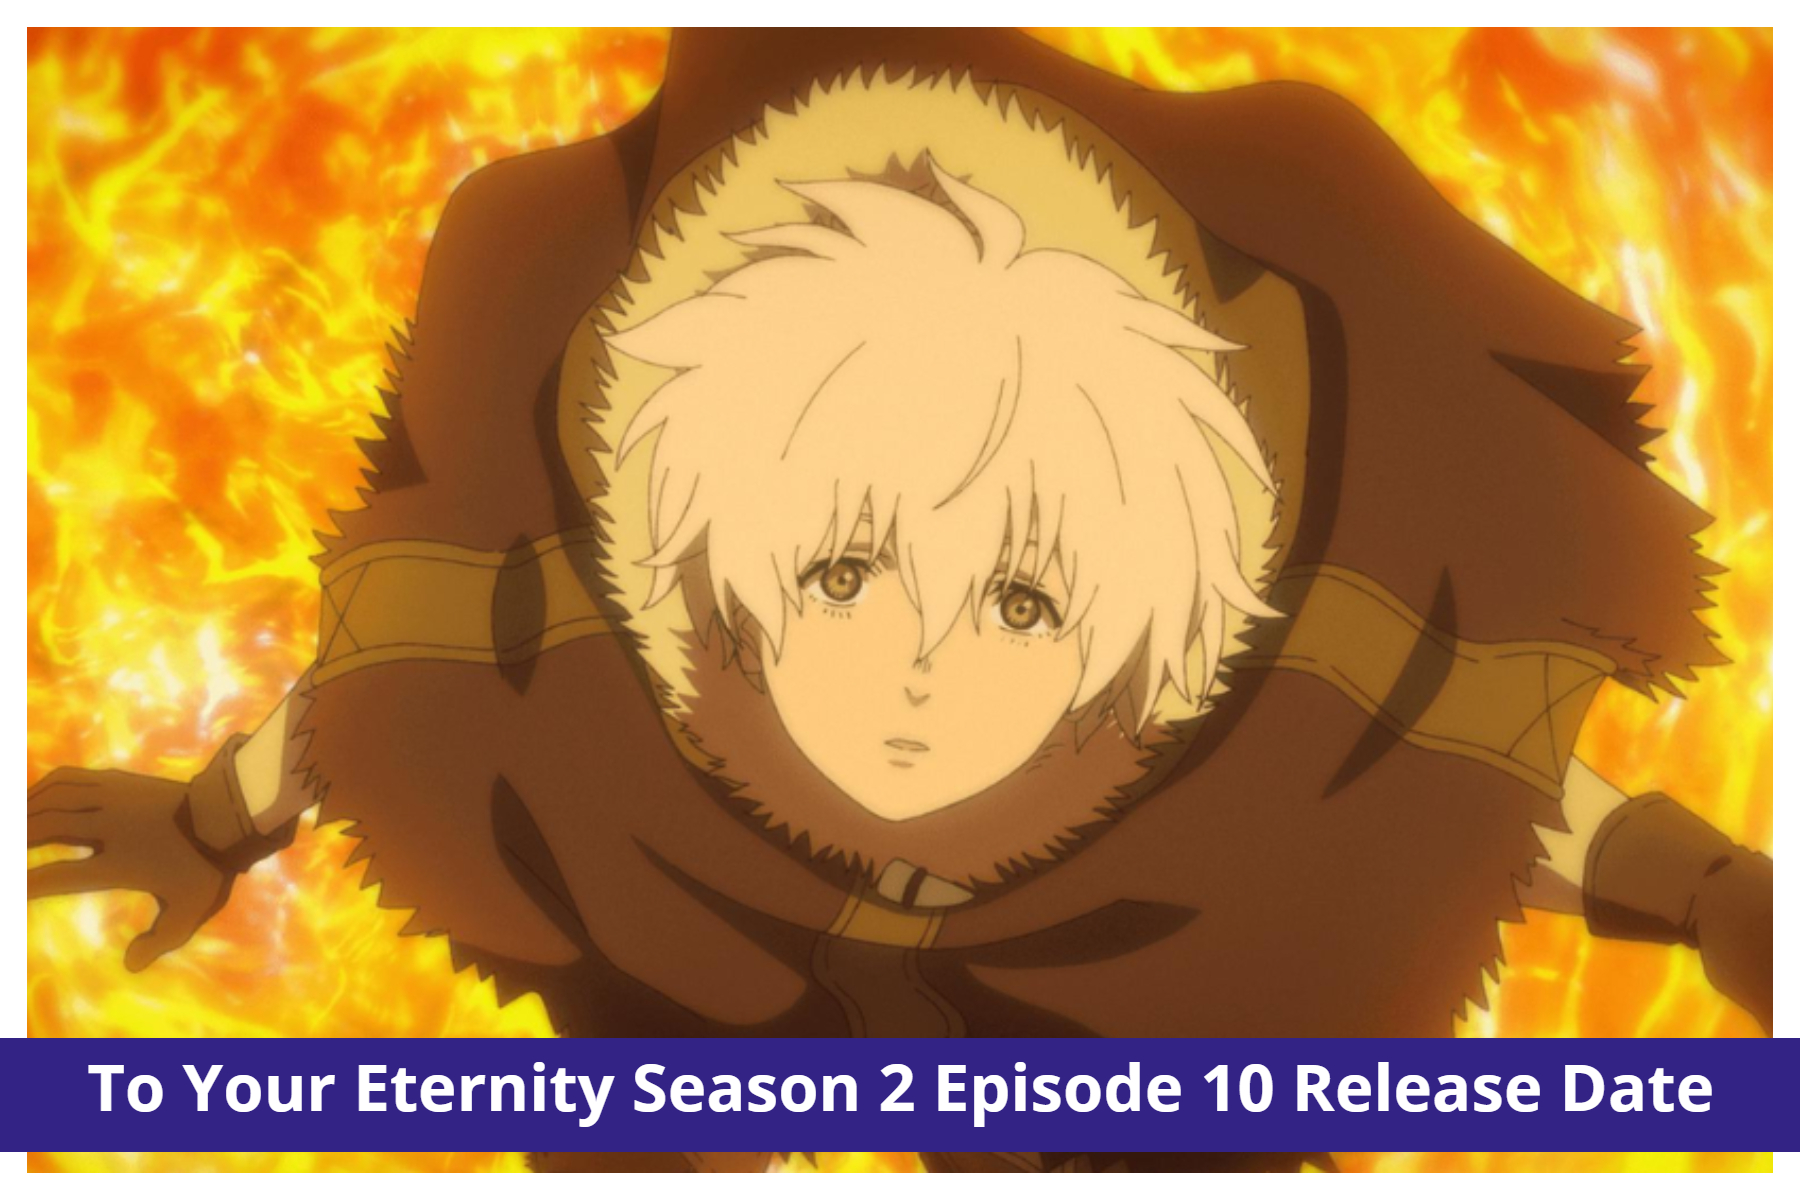 To Your Eternity Season 2 Episode 10 Review - But Why Tho?